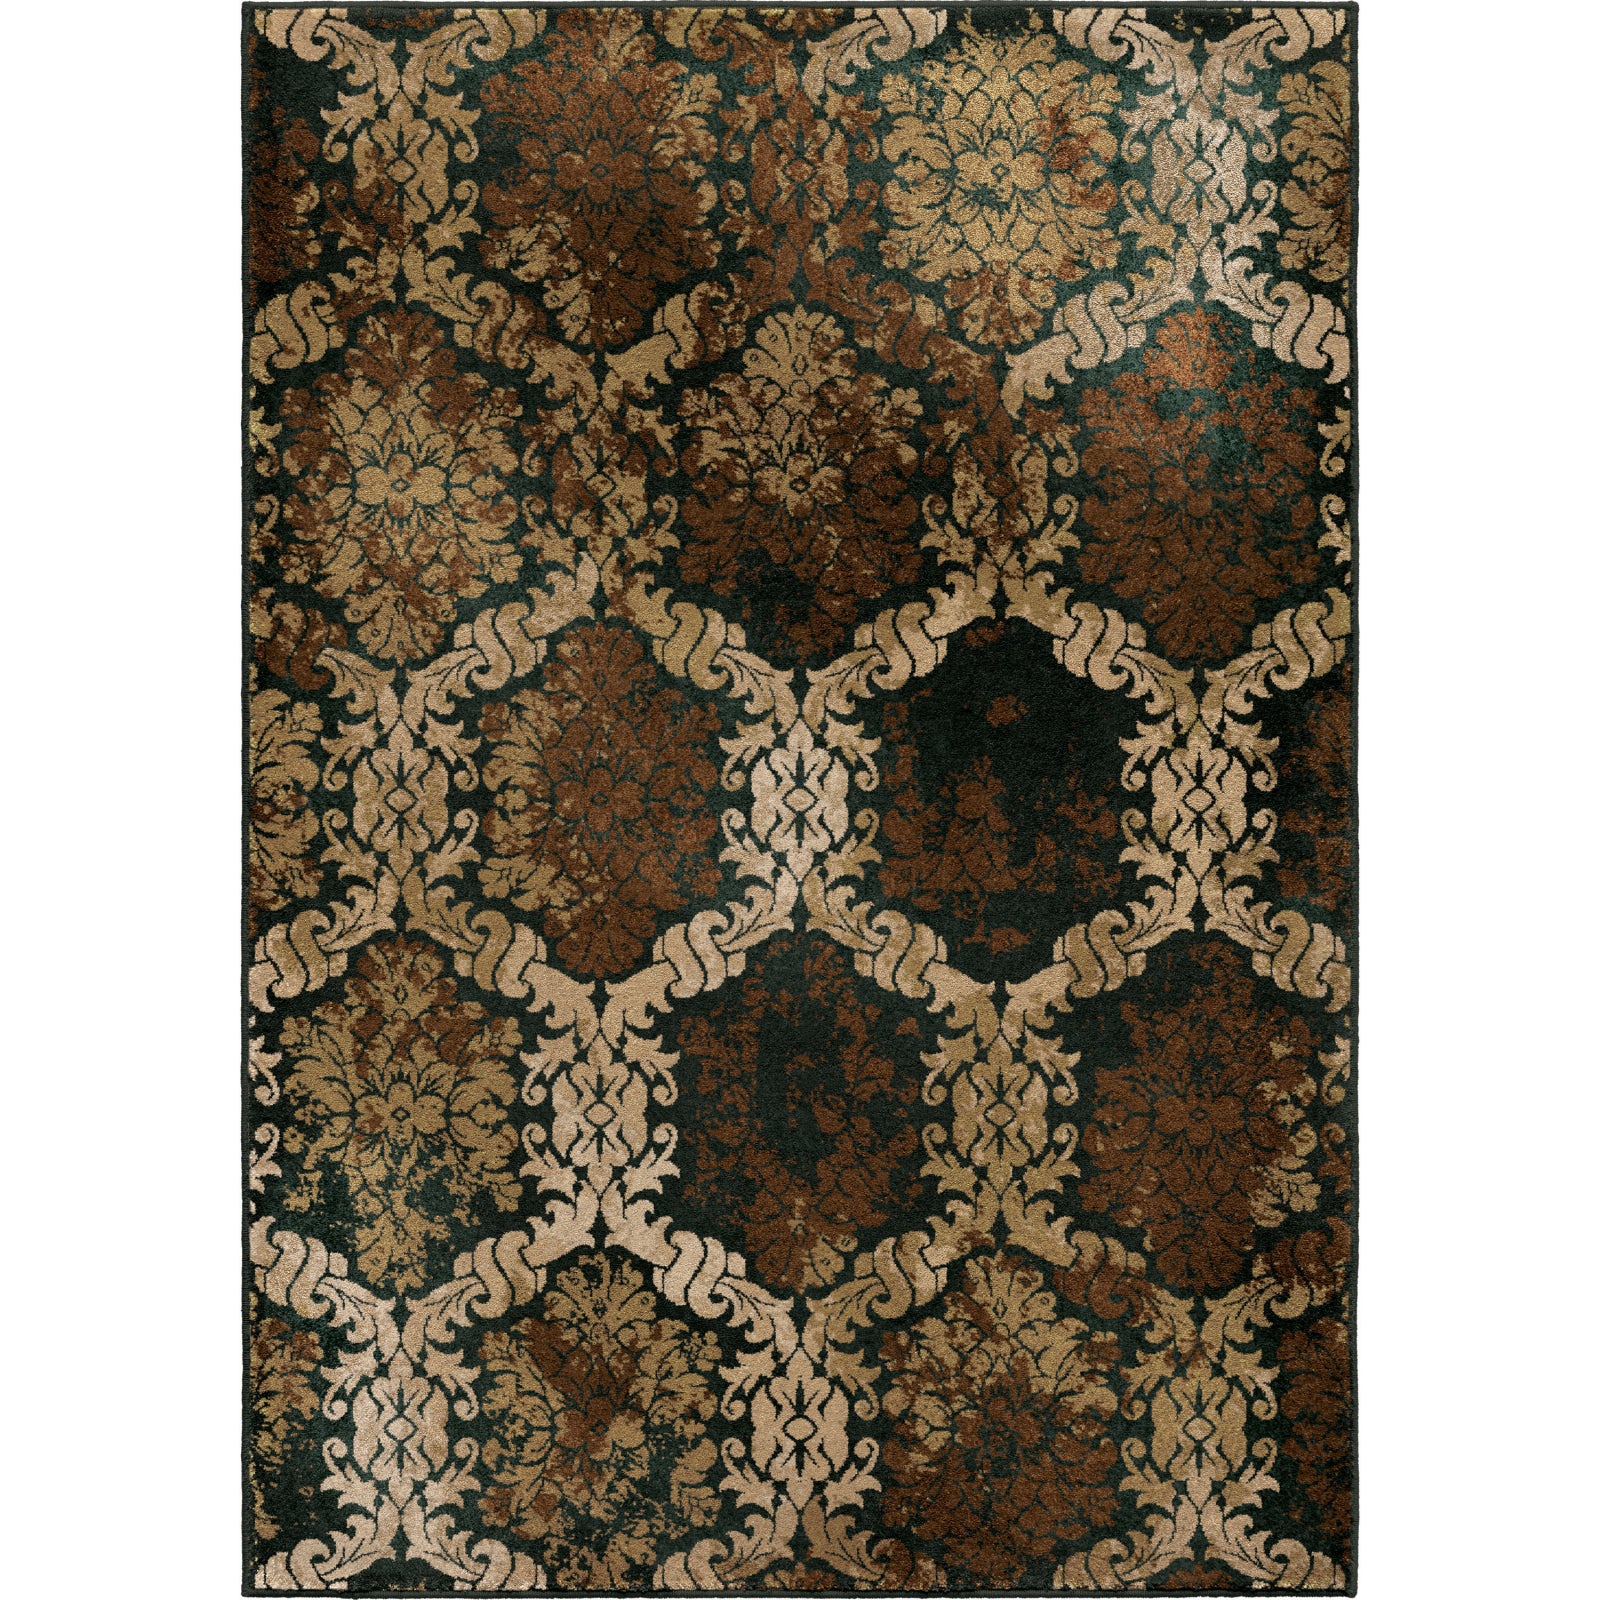 Orian Rugs Vivacious Thorncliffe Brown Area Rug main image